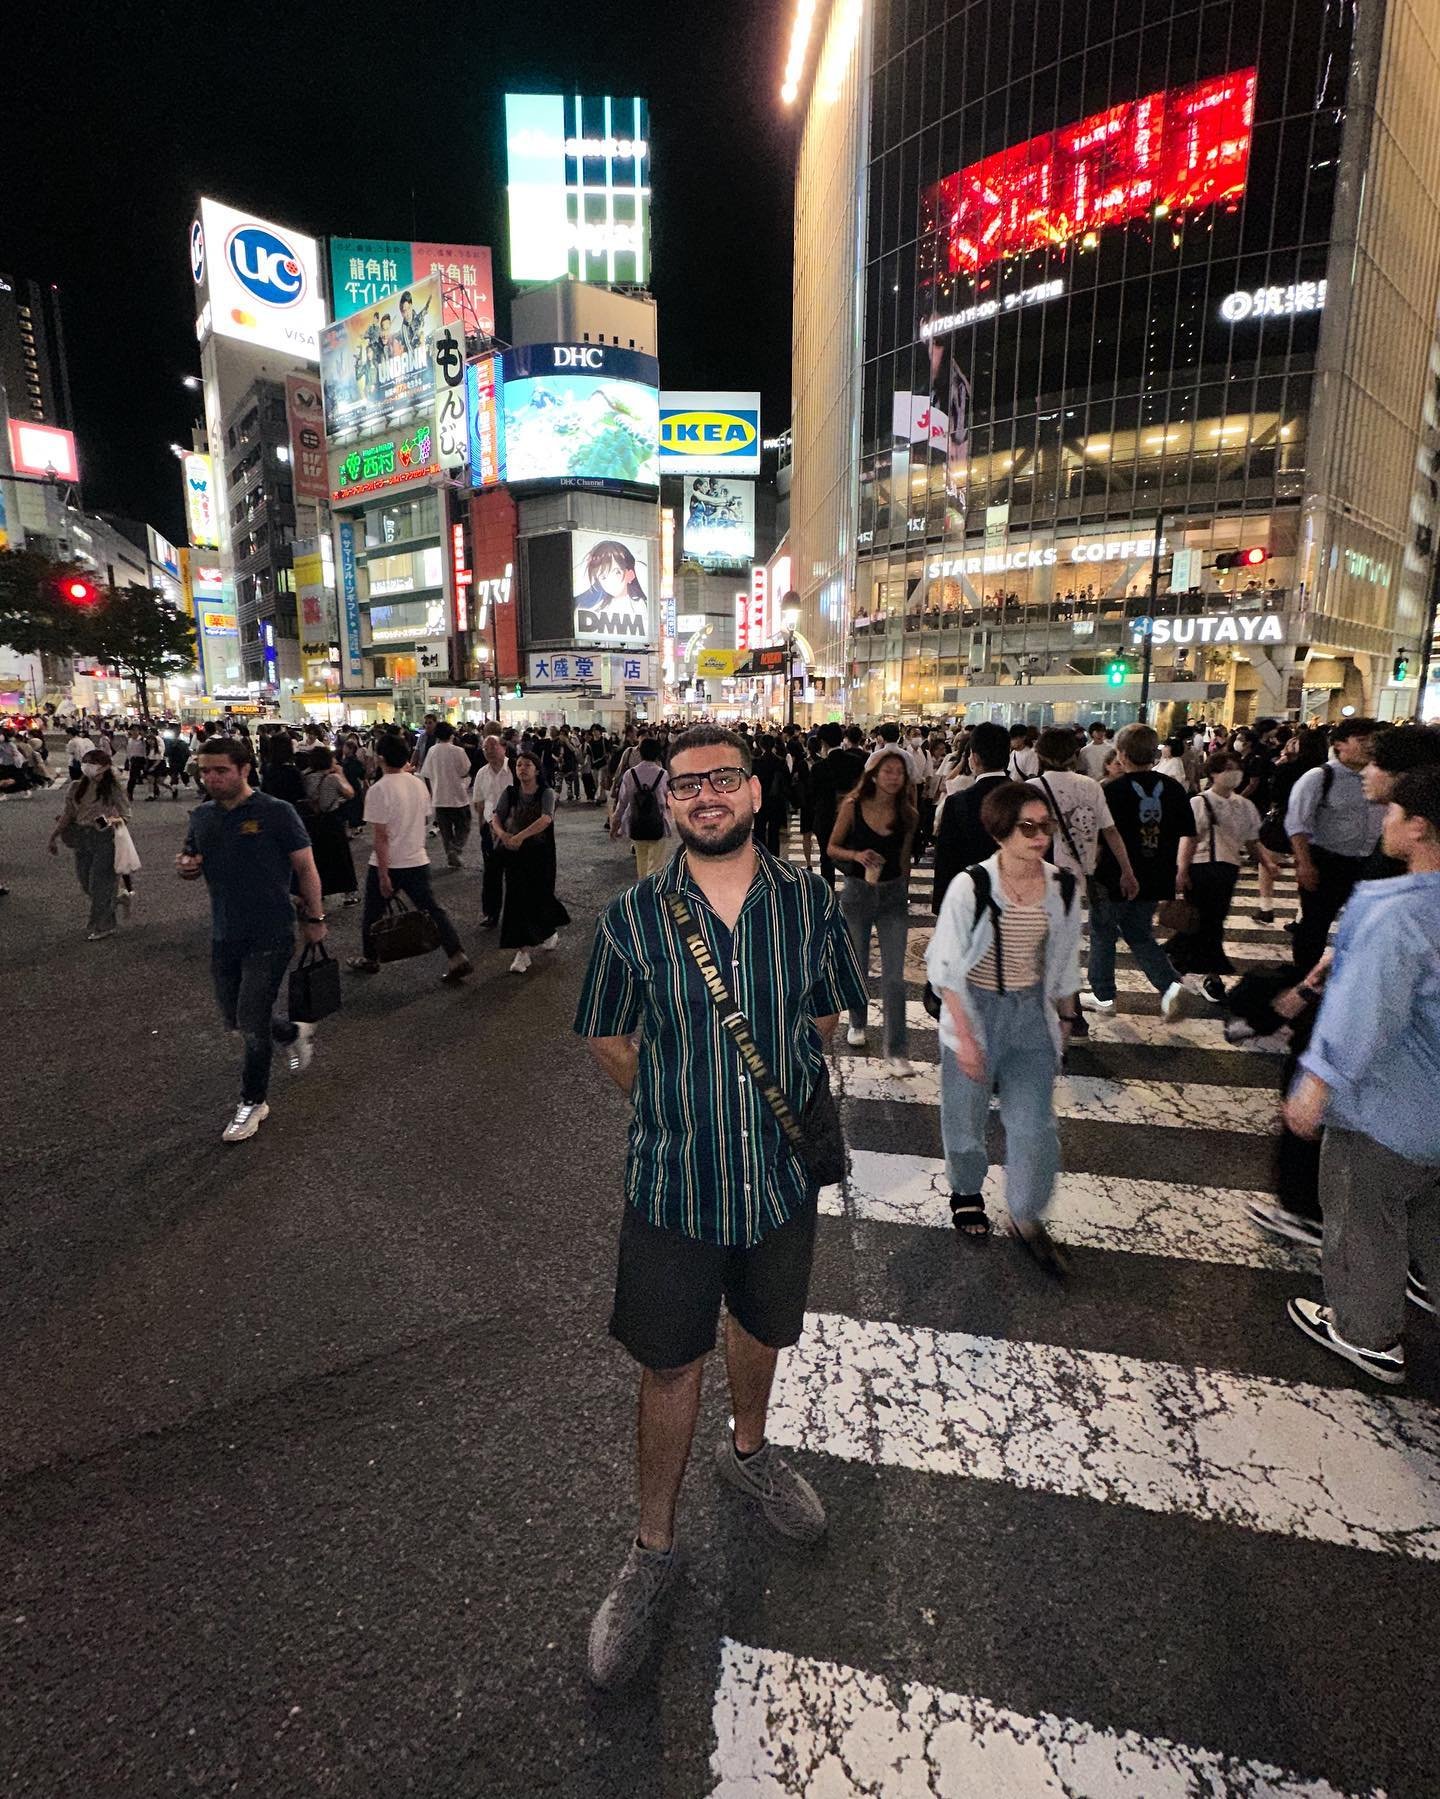 Straight from Shibuya, on some zen. We back, ramped up, we on ten.